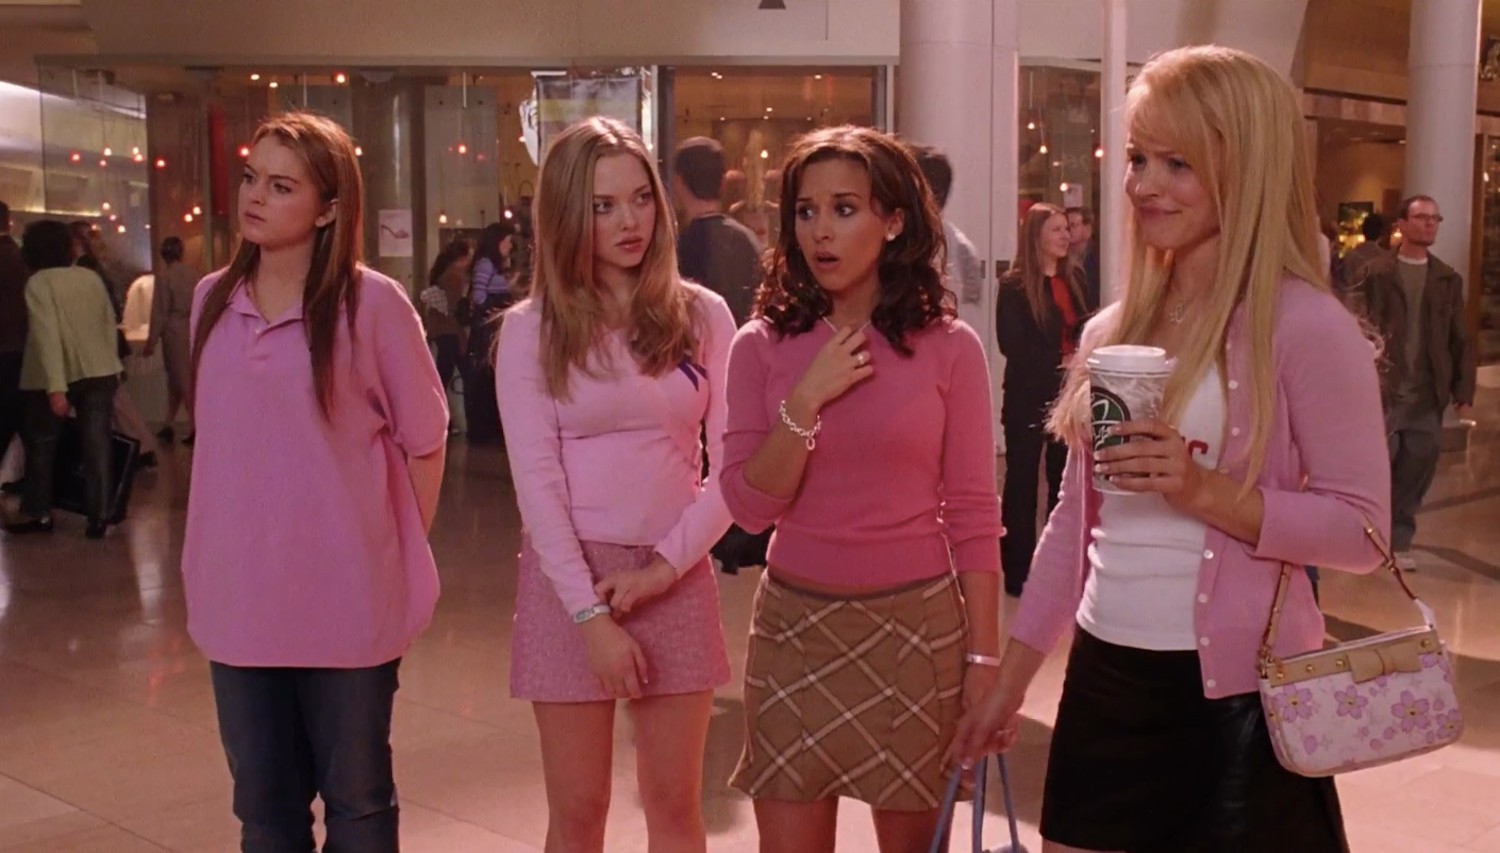 Gretchen Wieners., Mean Girls Outfit